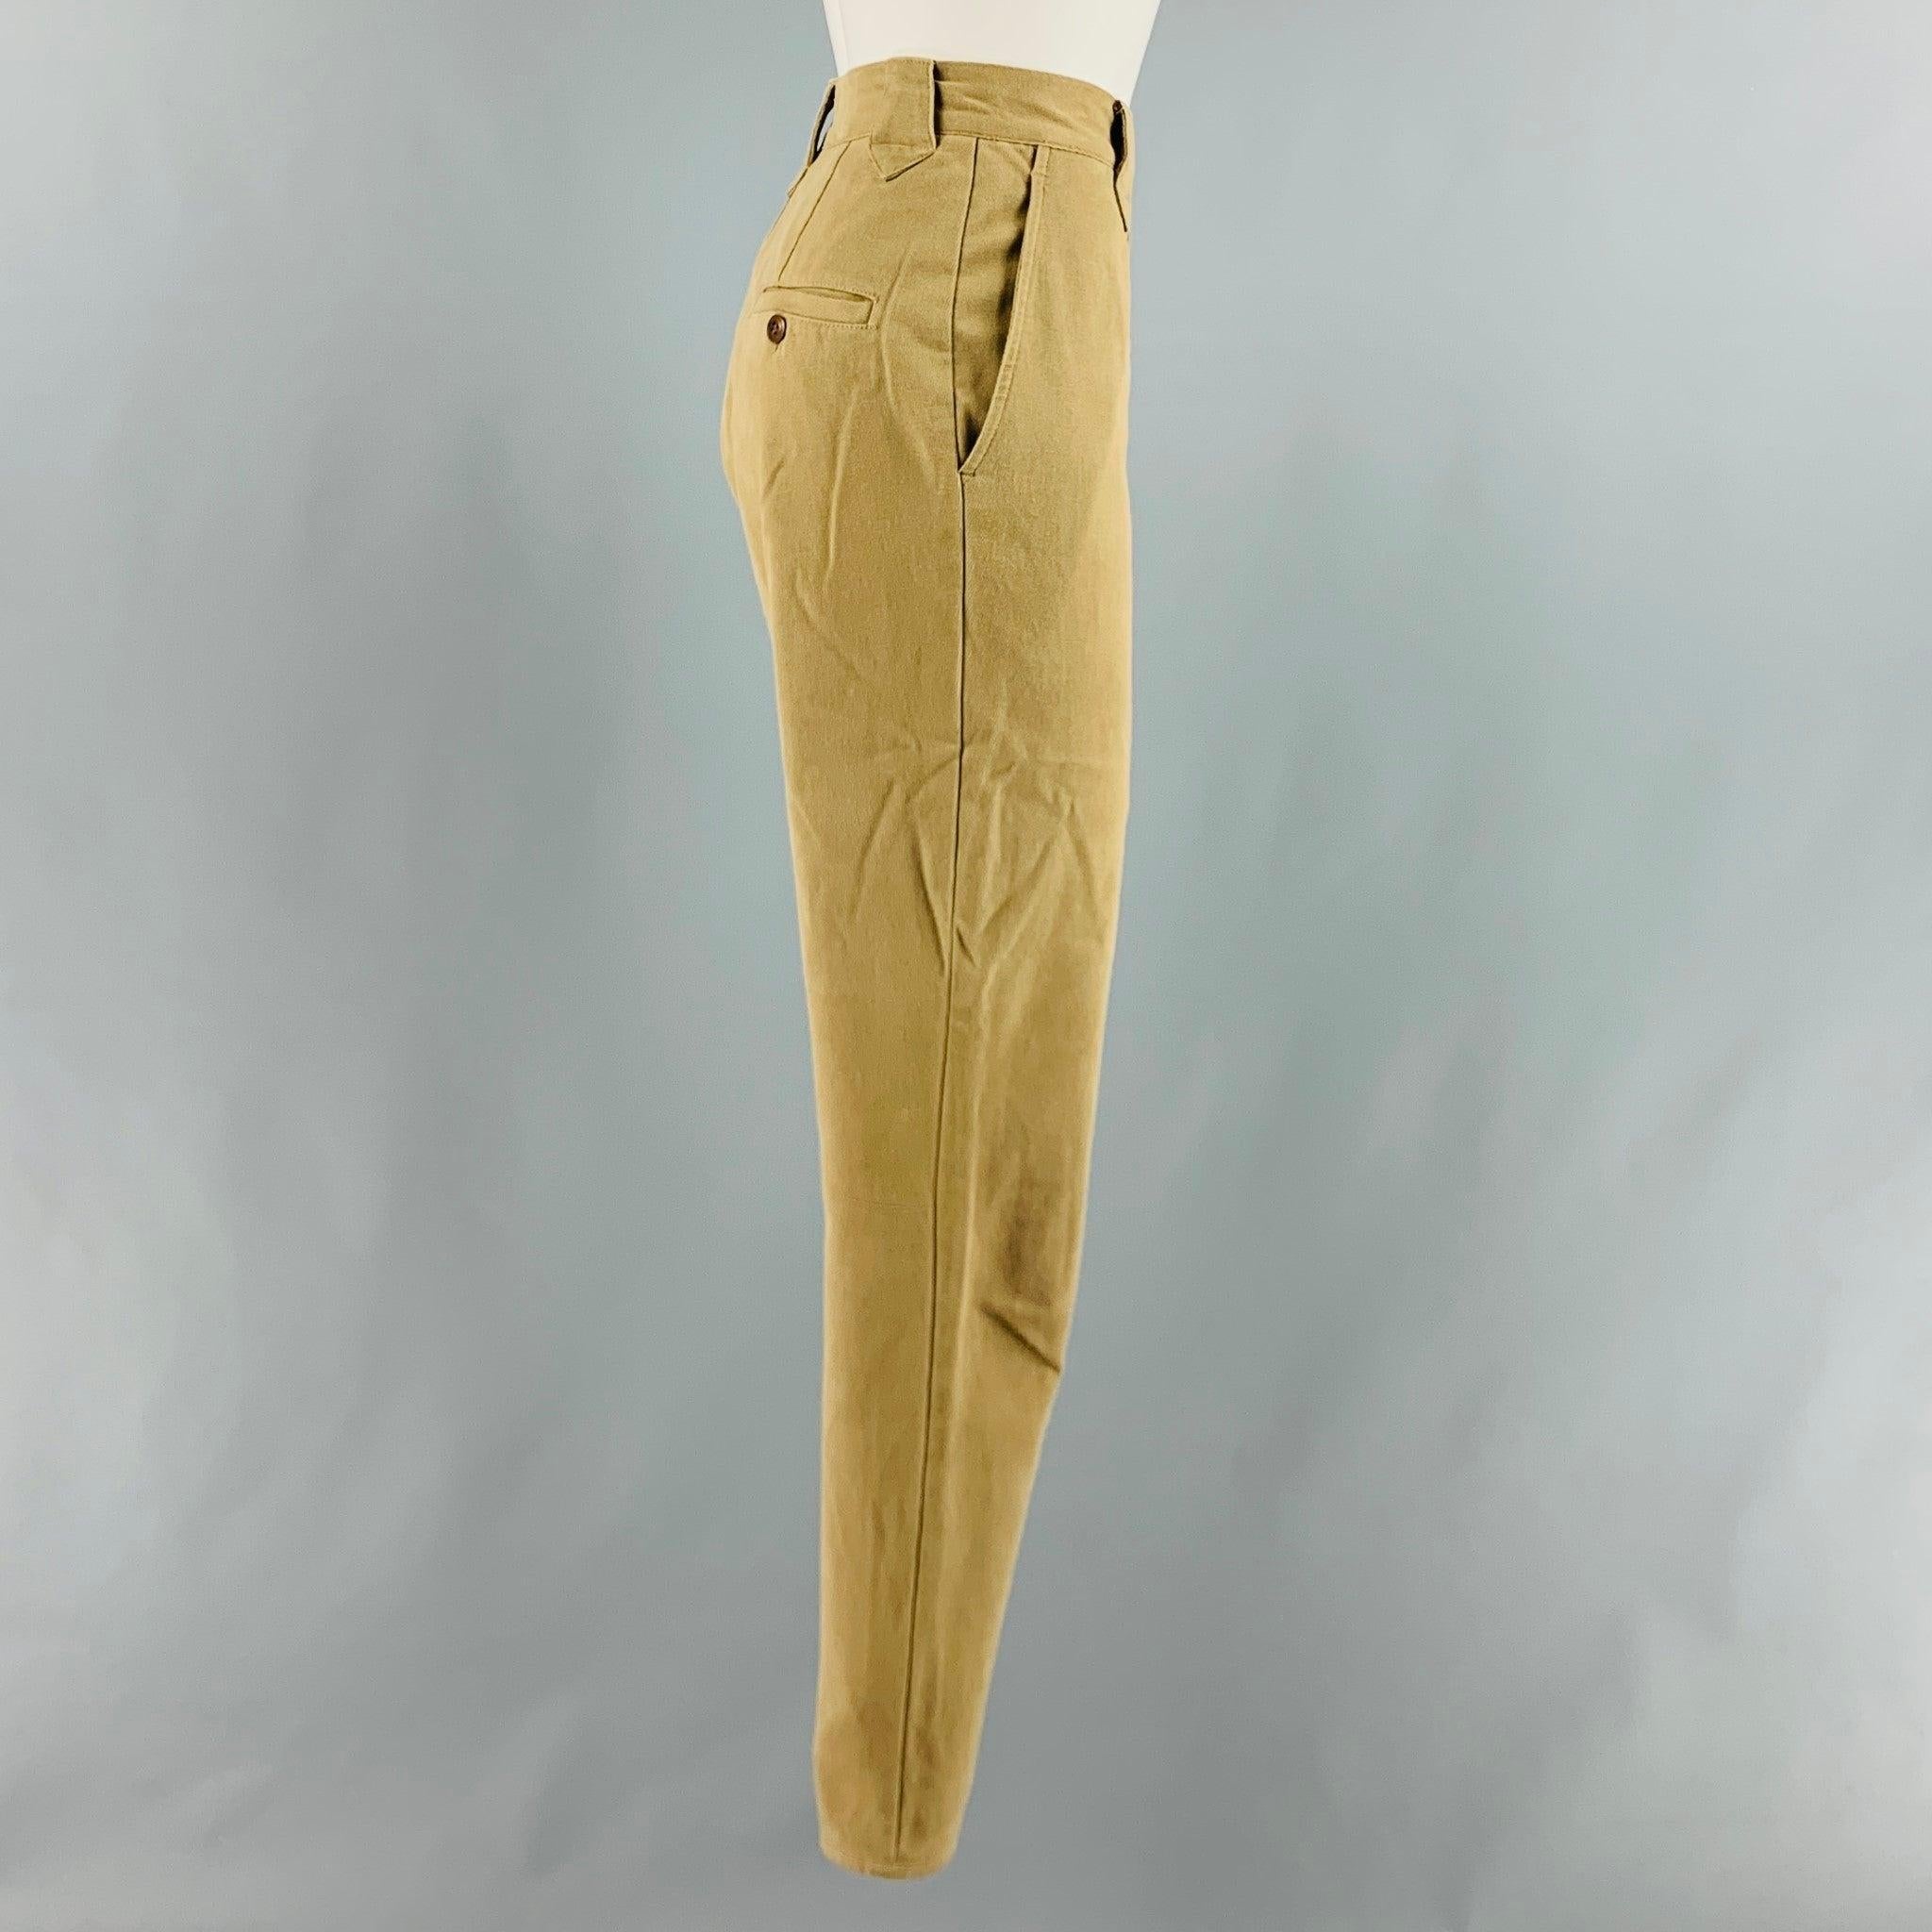 RALPH LAUREN COUNTRY casual pants comes in a khaki and brown cotton and lycra twill featuring brown suede patch details, slim fit, high waist, zipper cuffs, and a zip fly closure. Made in USA.Excellent Pre-Owned Condition. 

Marked:   10